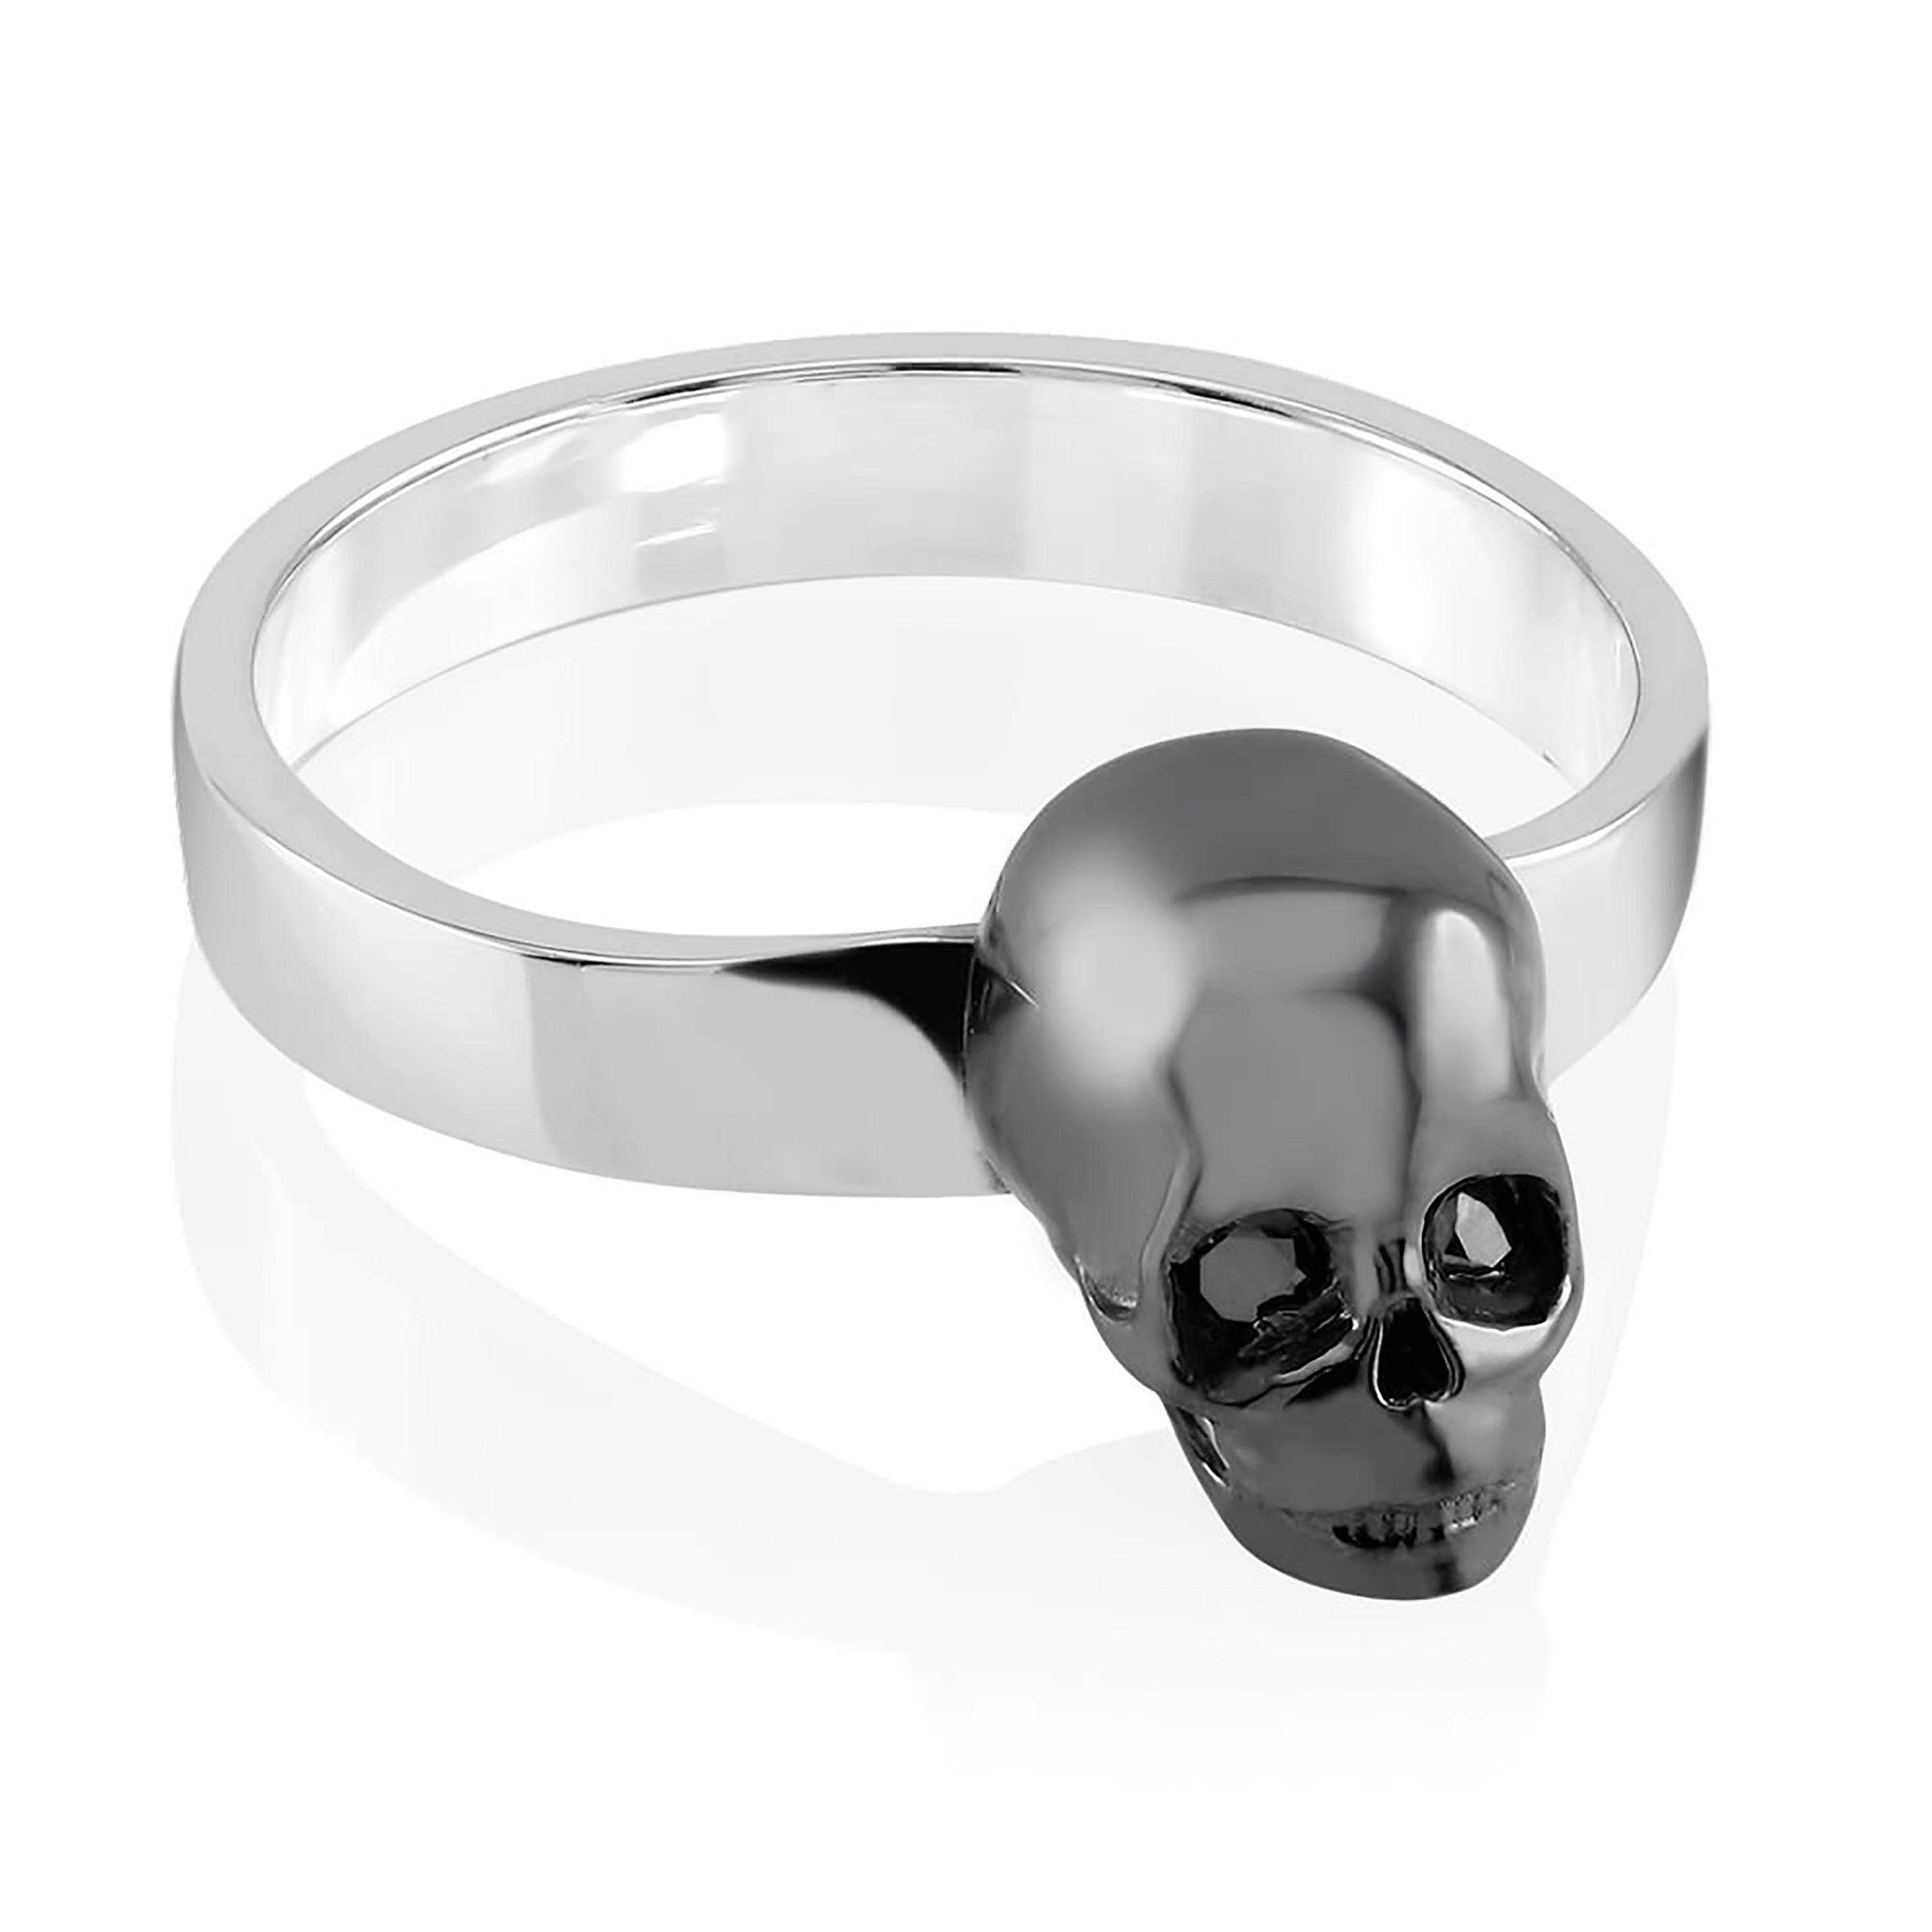 Sterling Silver Skull ring
Skull shape measuring 0.50 inch
Ring size 5
Two round genuine black diamonds weighing 0.05 carats set as eyes
New Ring
Handmade in the USA
The ring cannot be resized